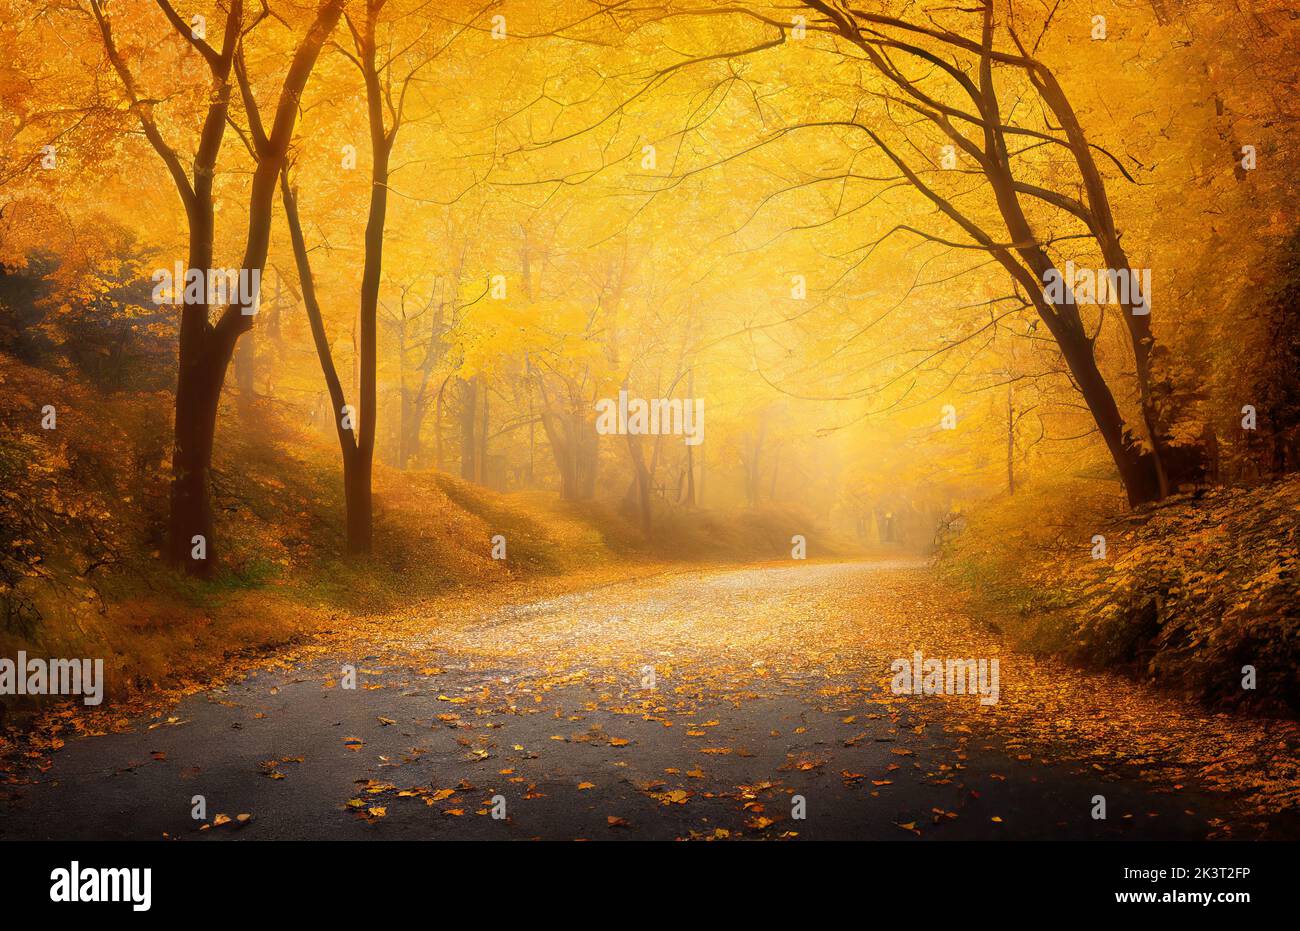 Yellow autumn trees along a park road in a foggy day. Digital 3D illustration Stock Photo